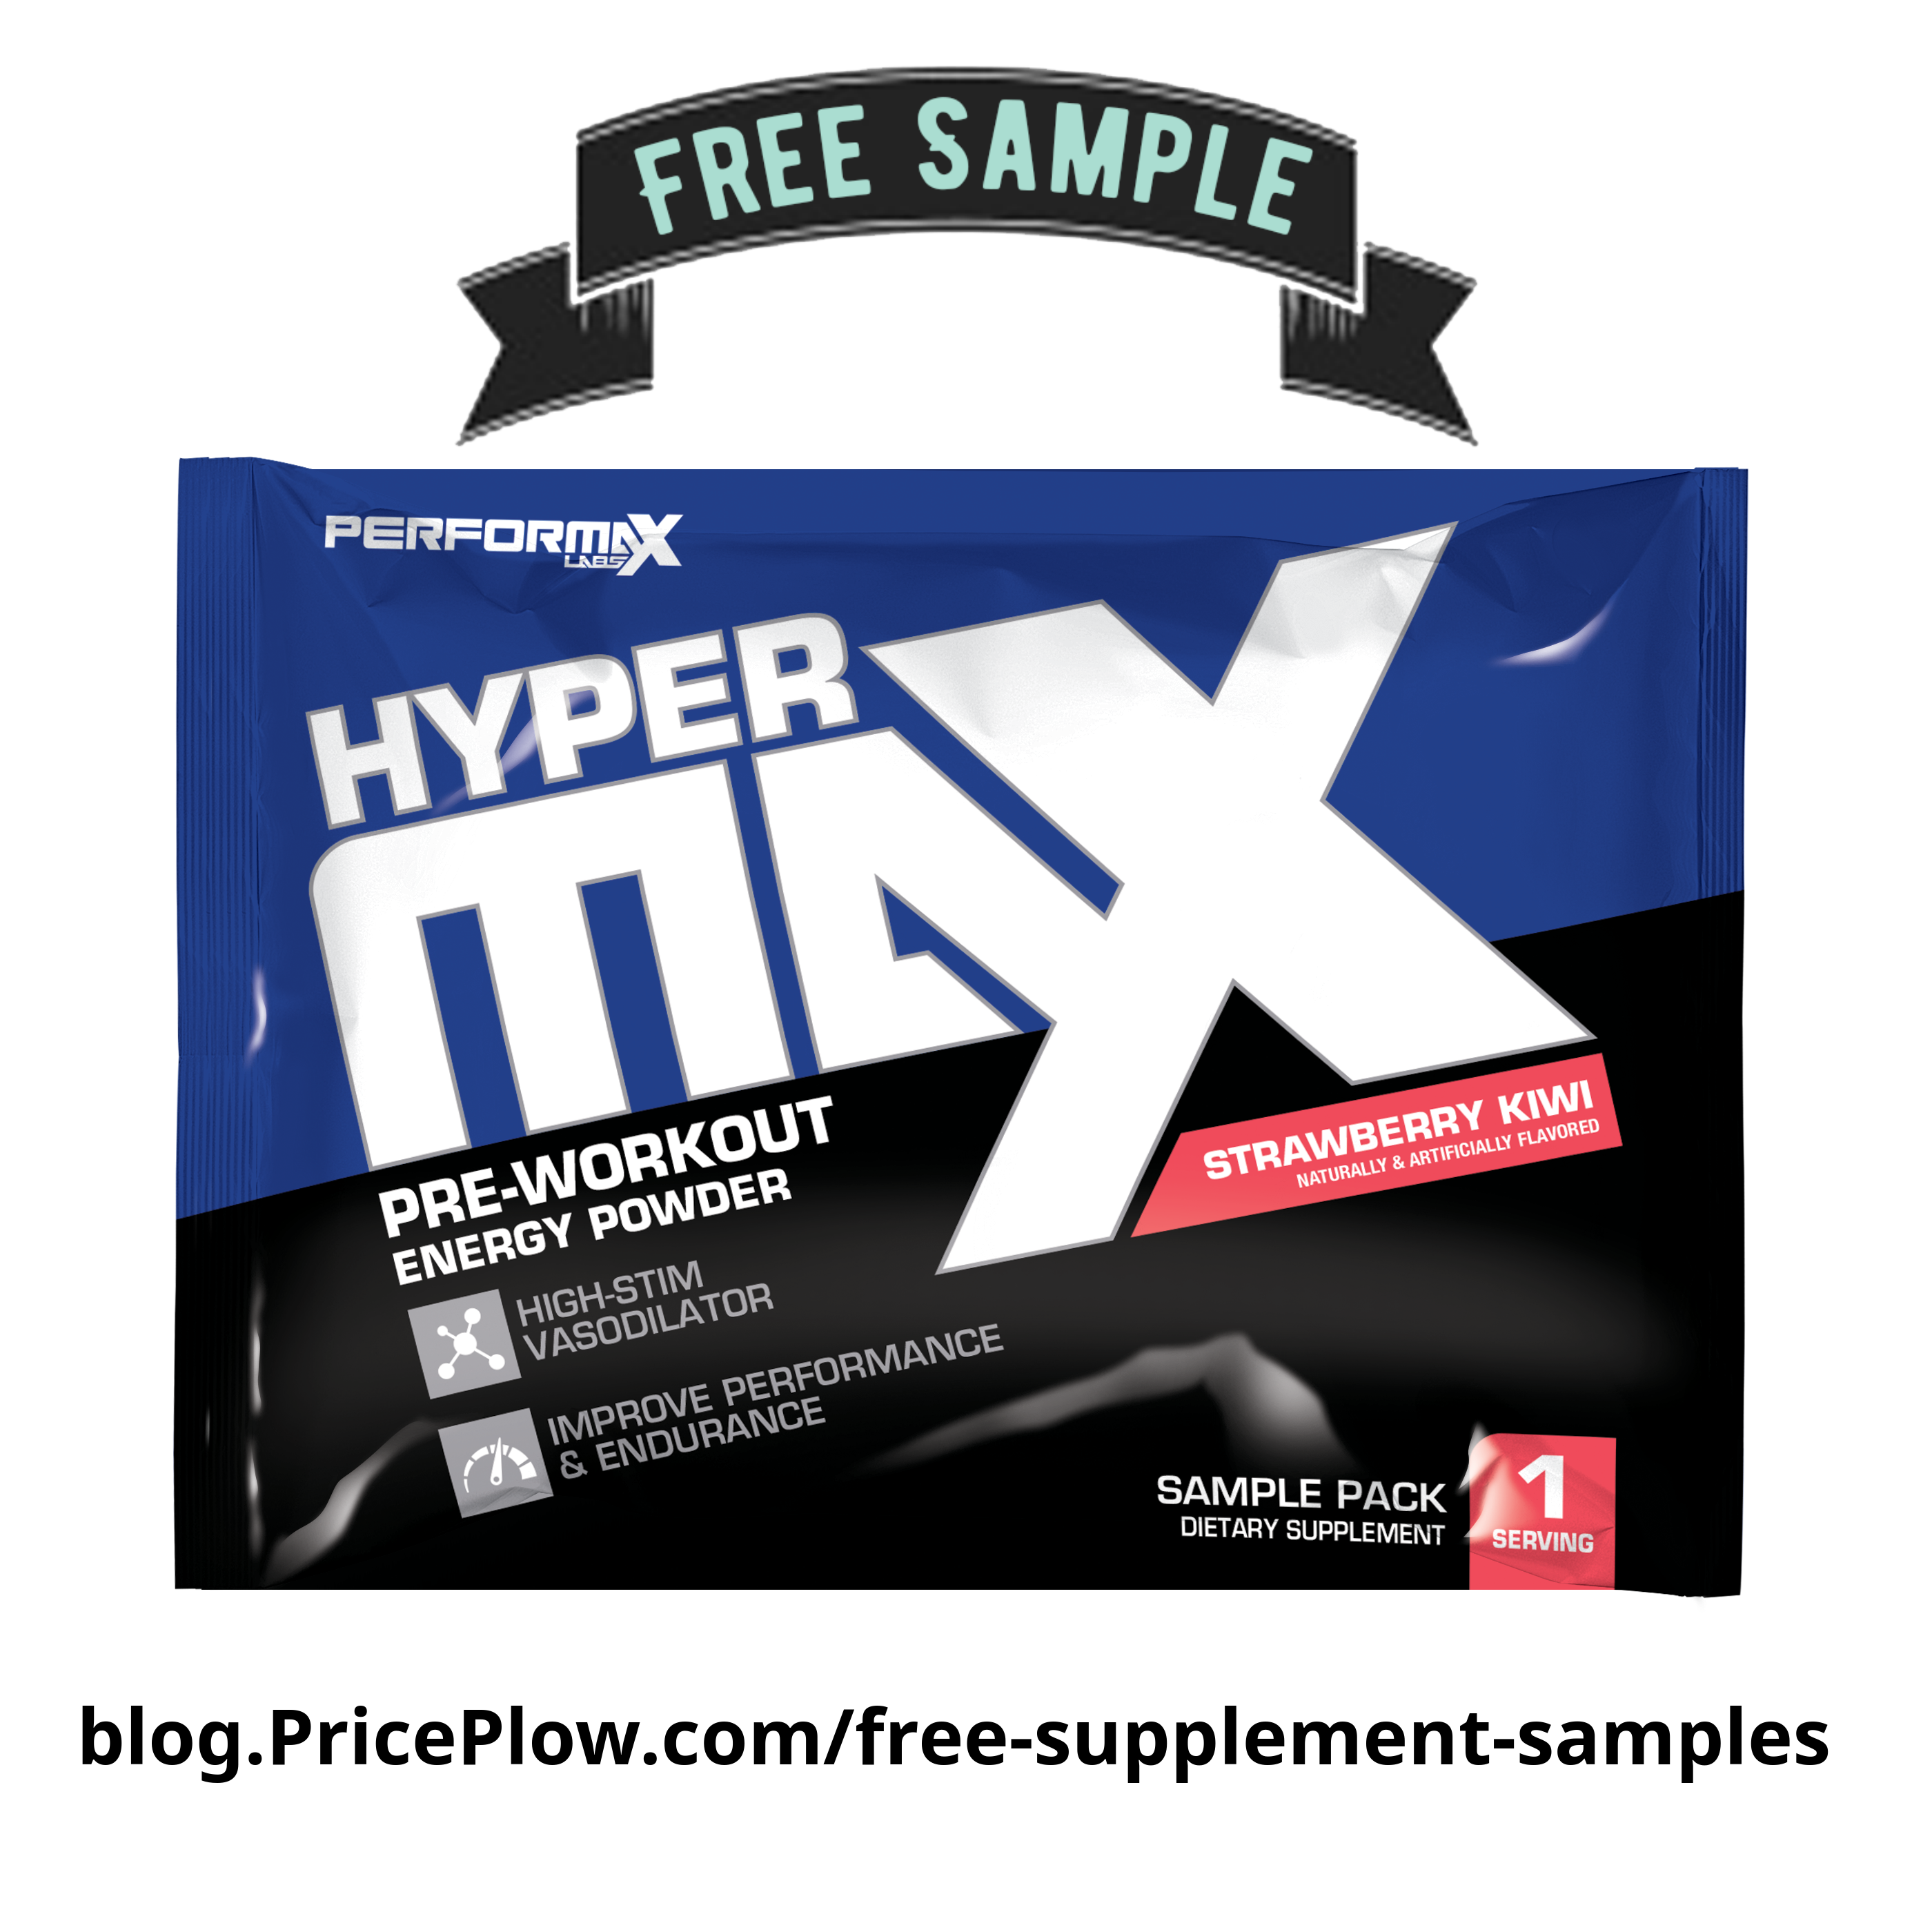 Free Sample of Performax Labs HyperMax Pre Workout!